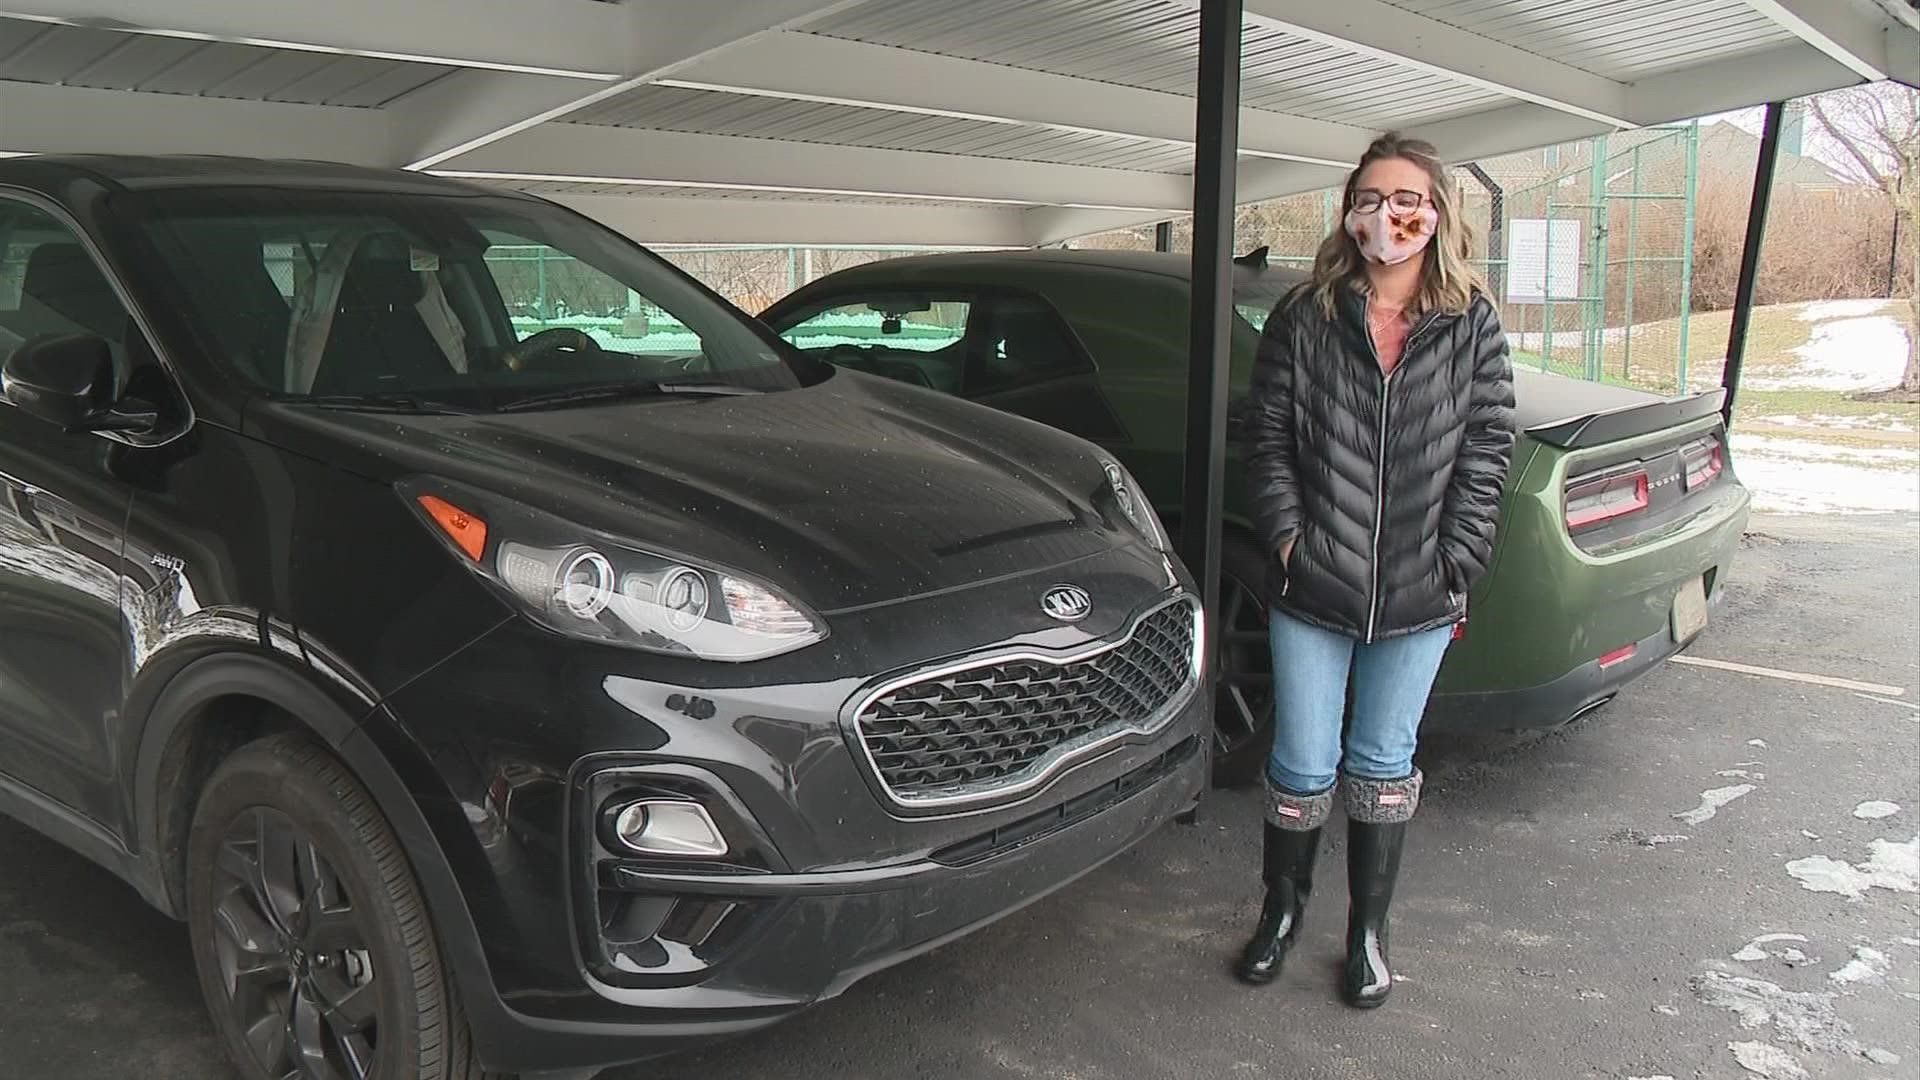 Katie Conn said her family had three Kias stolen from them in less than a week. Thieves have been targeting the car brand because of a missing anti-theft device.